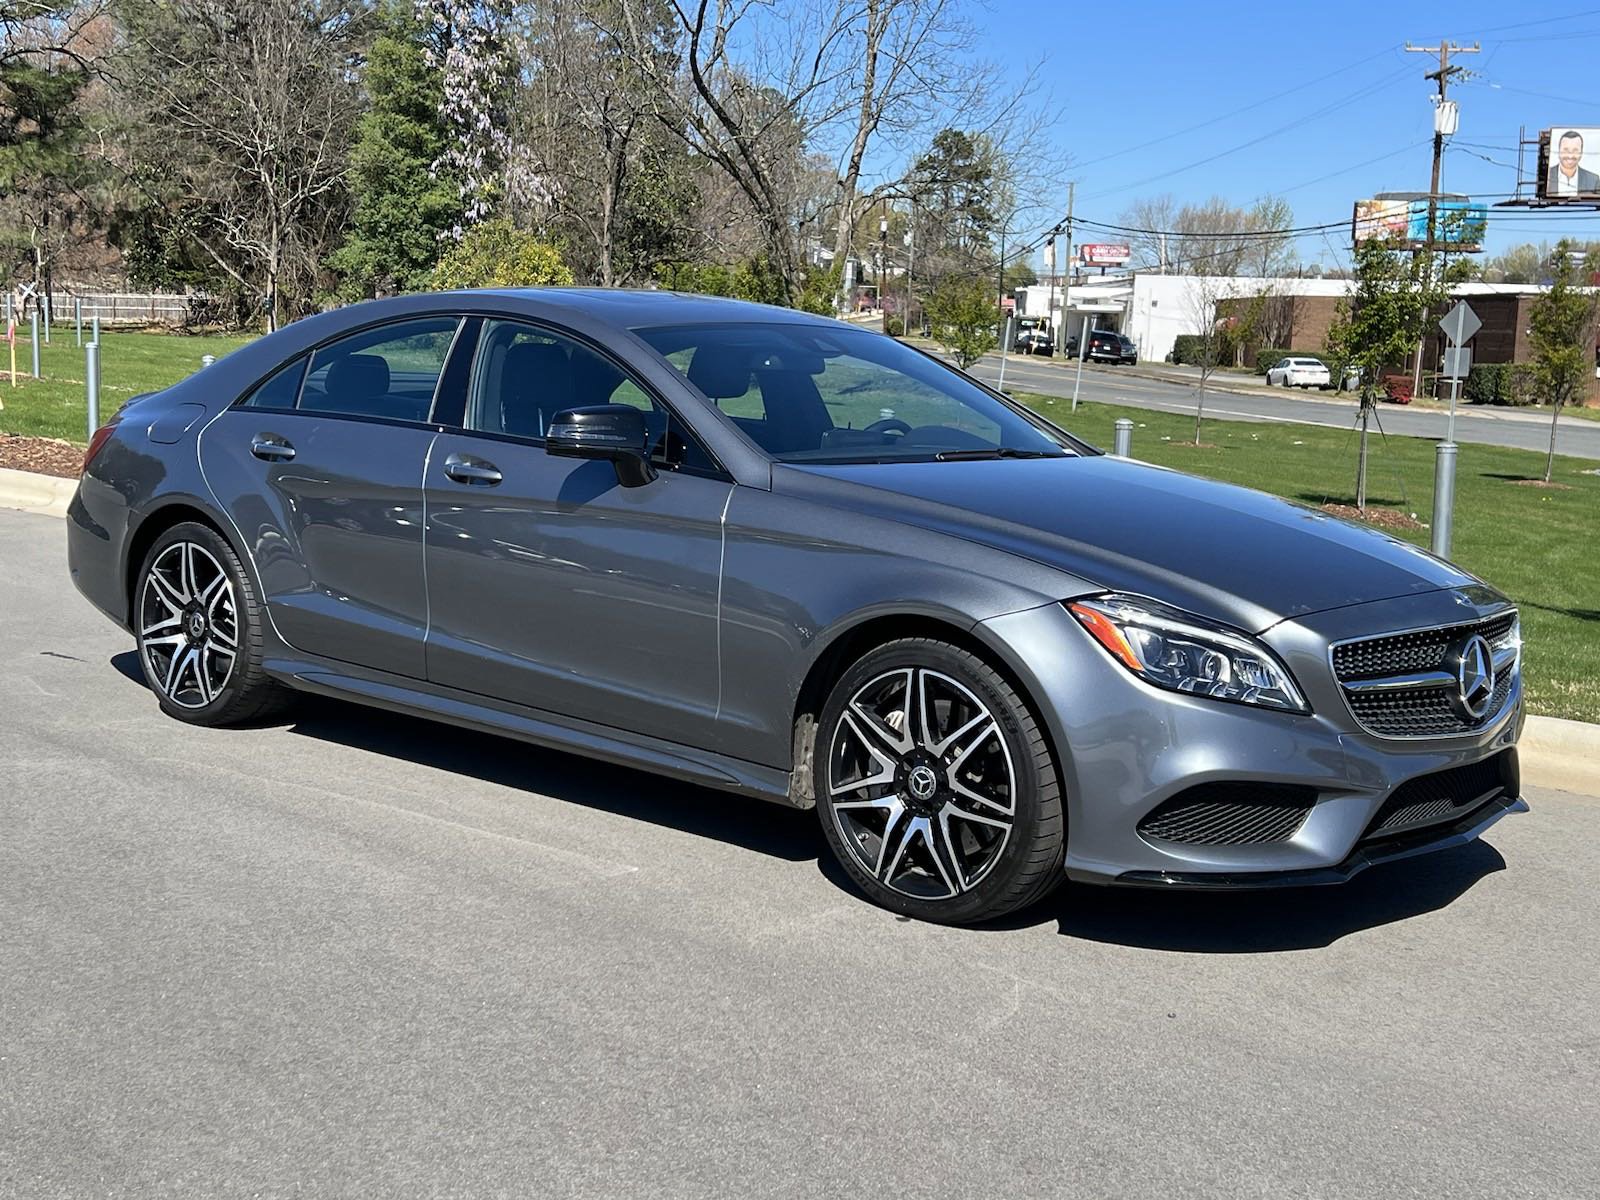 Pre-Owned 2017 Mercedes-Benz CLS CLS 550 Coupe in Merriam #Q14964A |  Hendrick Chevrolet Shawnee Mission